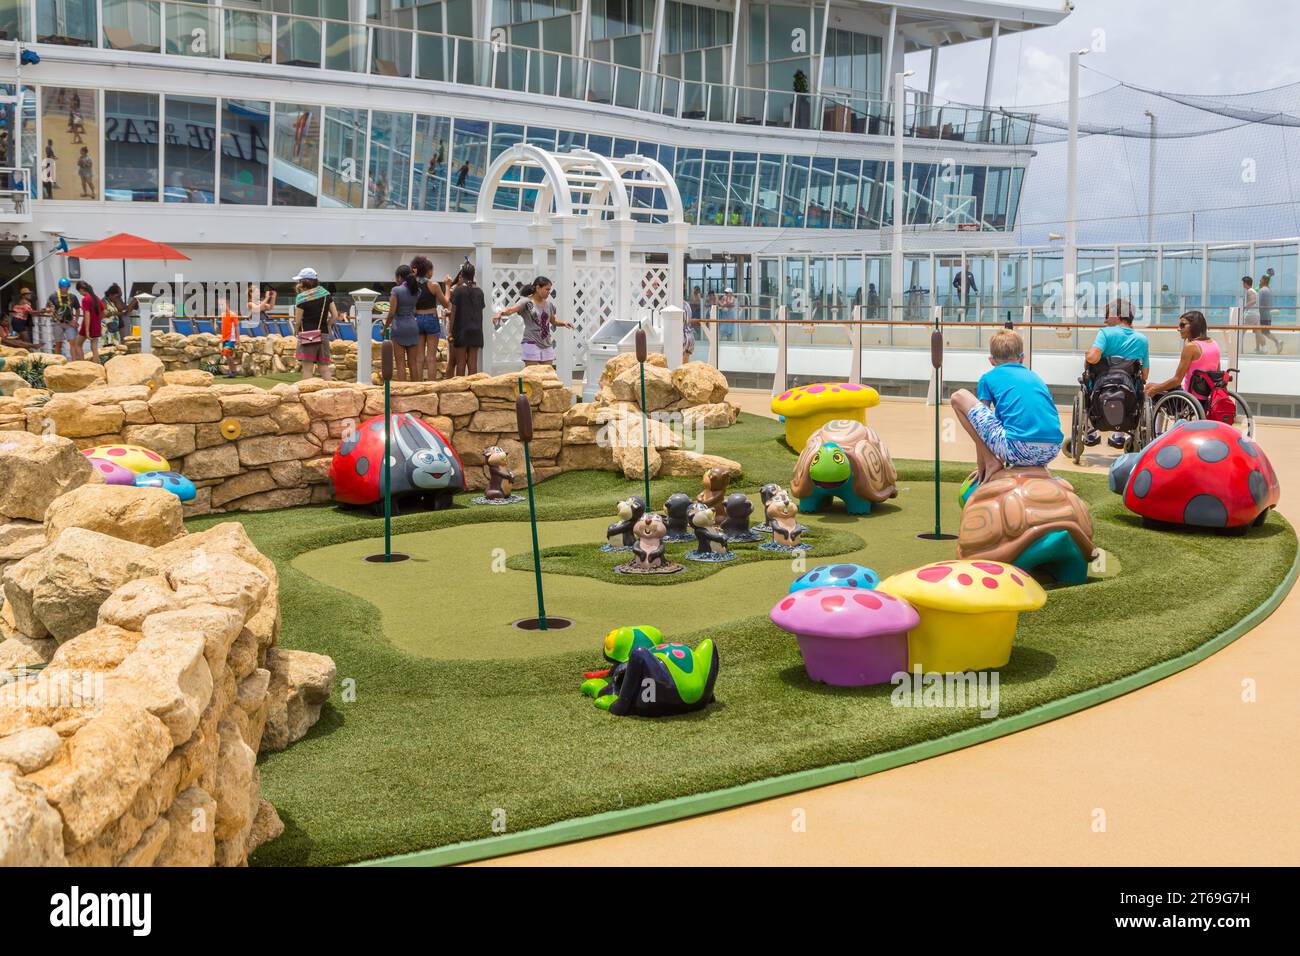 Cruise passengers playing miniature golf on the Royal Caribbean Allure of the Seas cruise ship Stock Photo